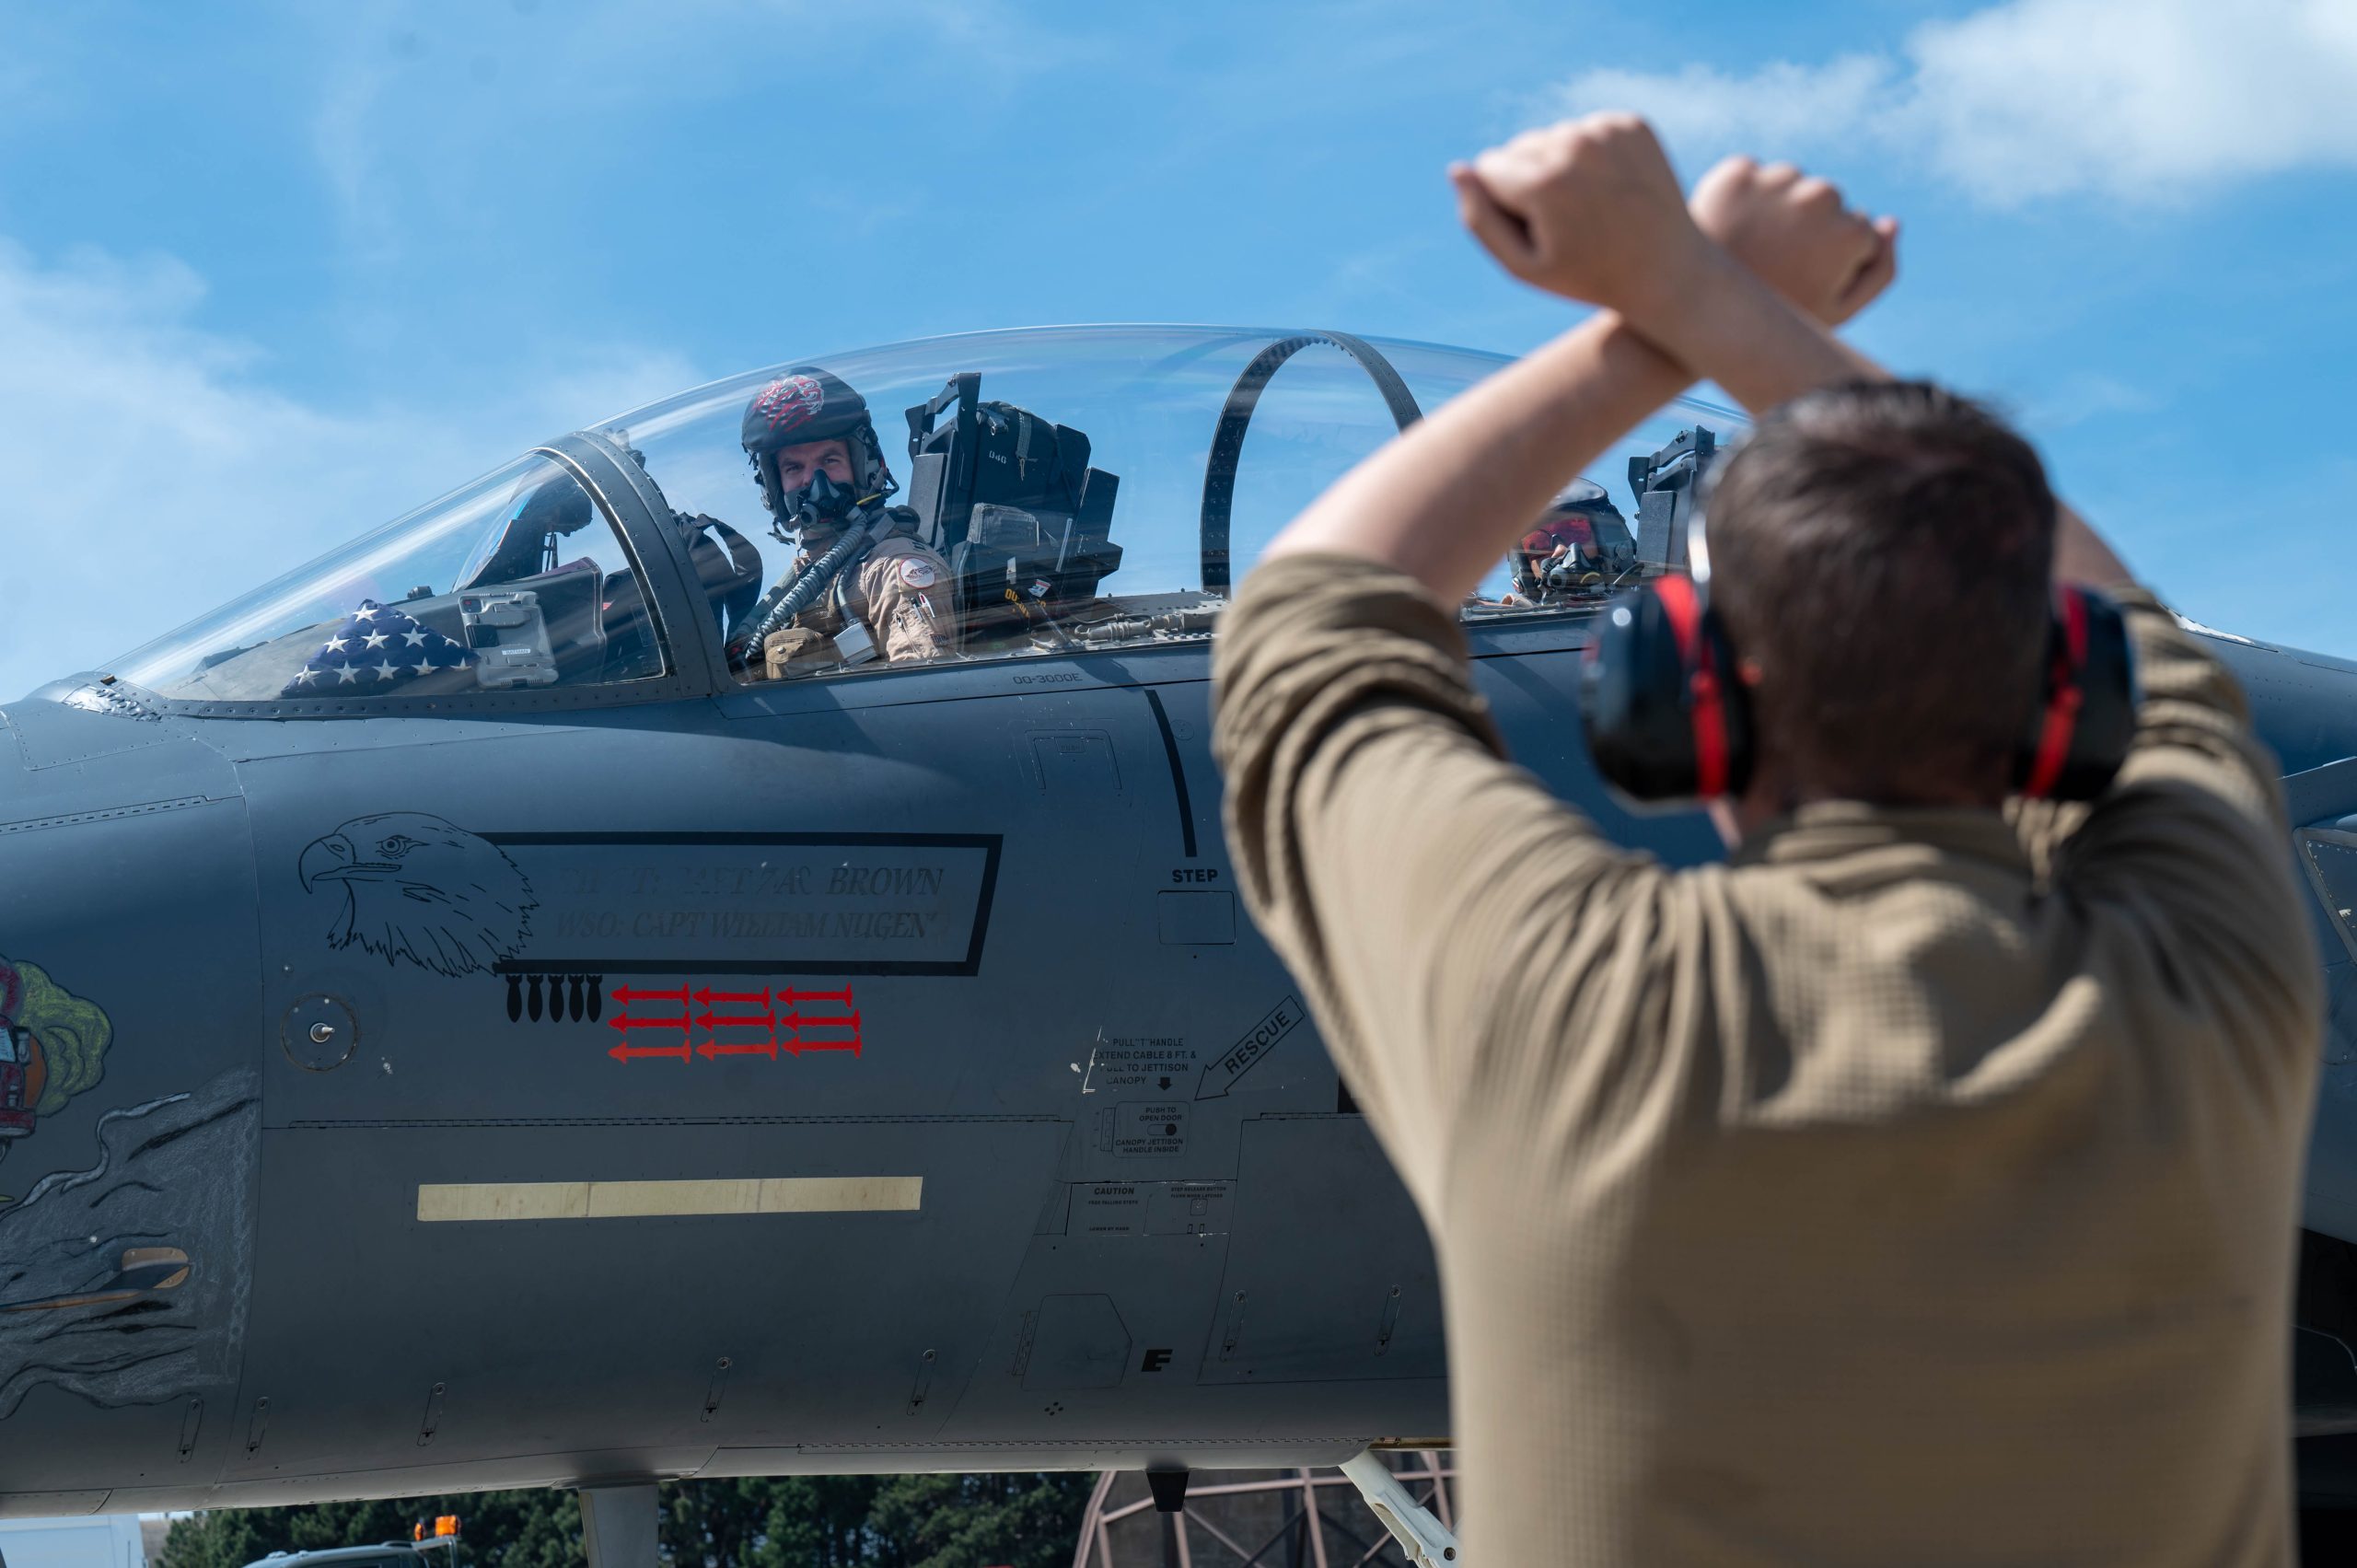 PHOTOS: USAF F-15s Return Home from Middle East With Kill Markings and Nose Art